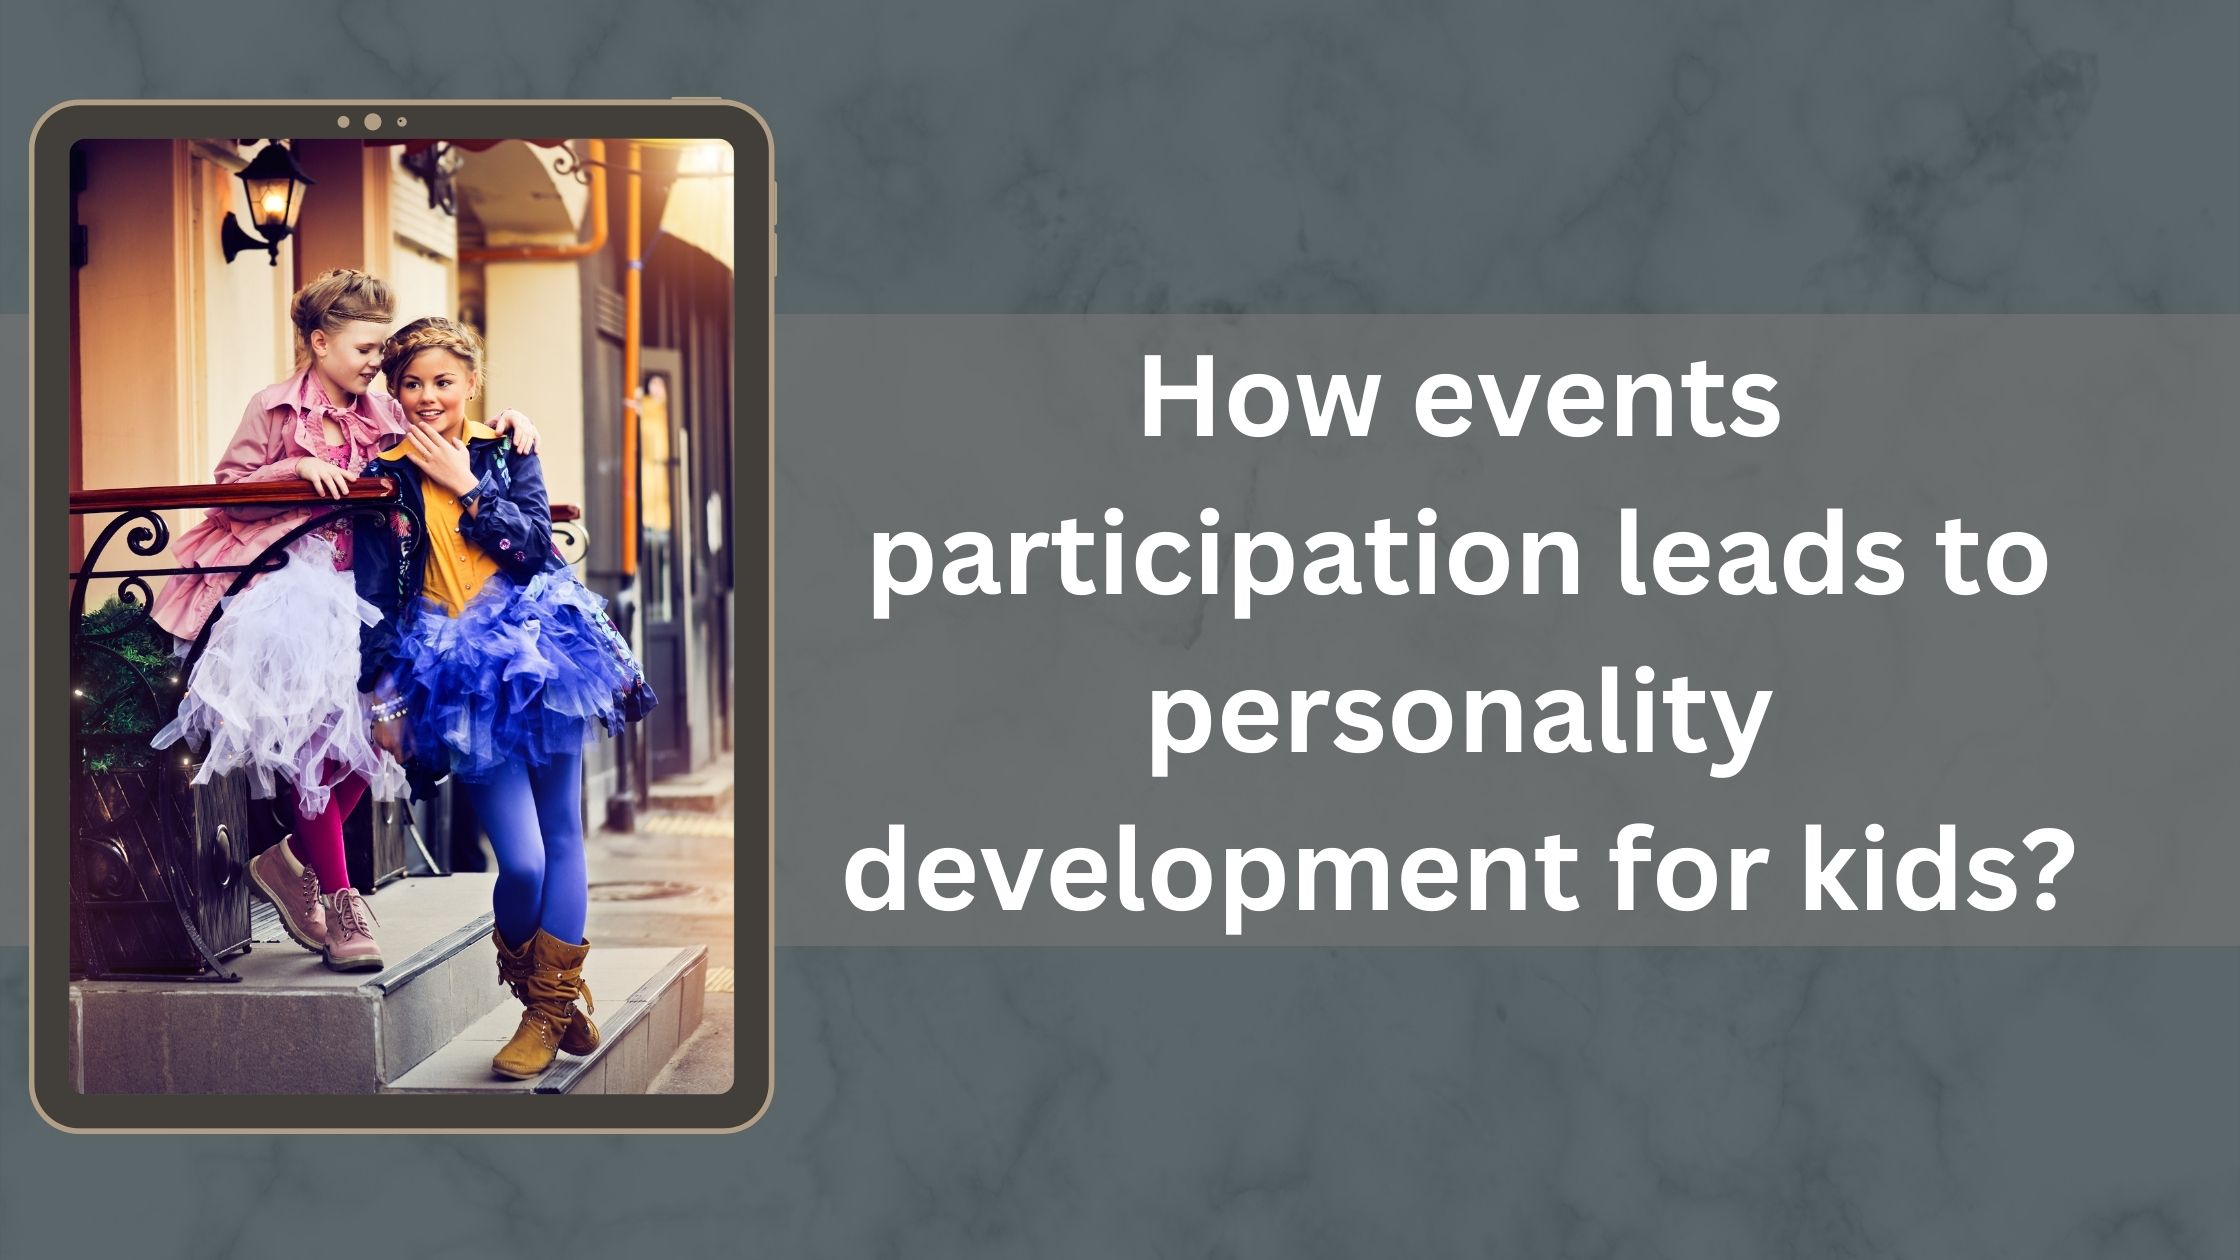 How events participation leads to personality development for kids